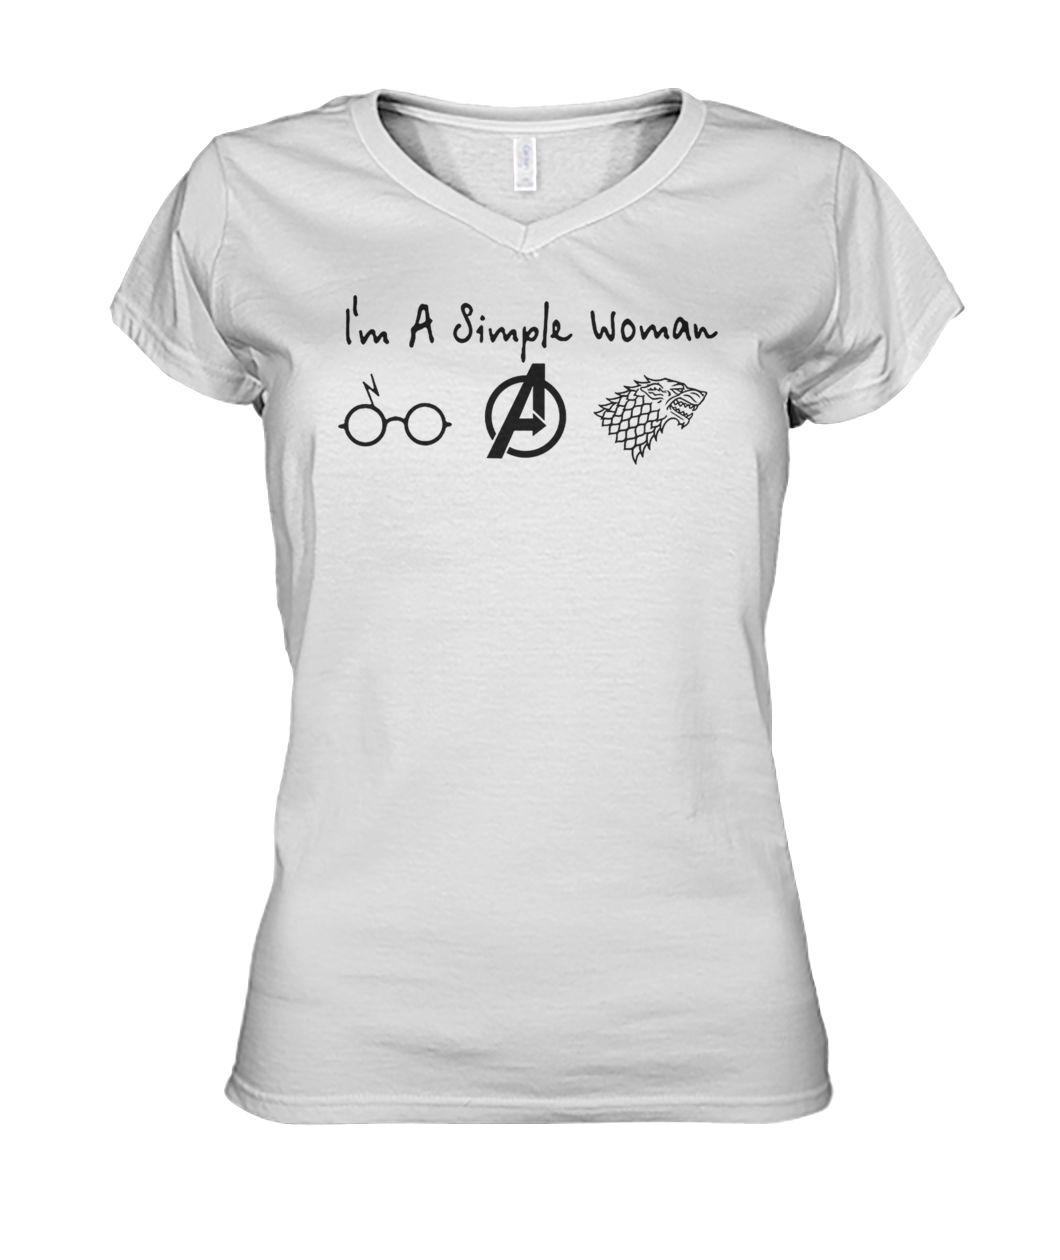 I'm a simple woman I love harry potter avengers and game of thrones women's v-neck